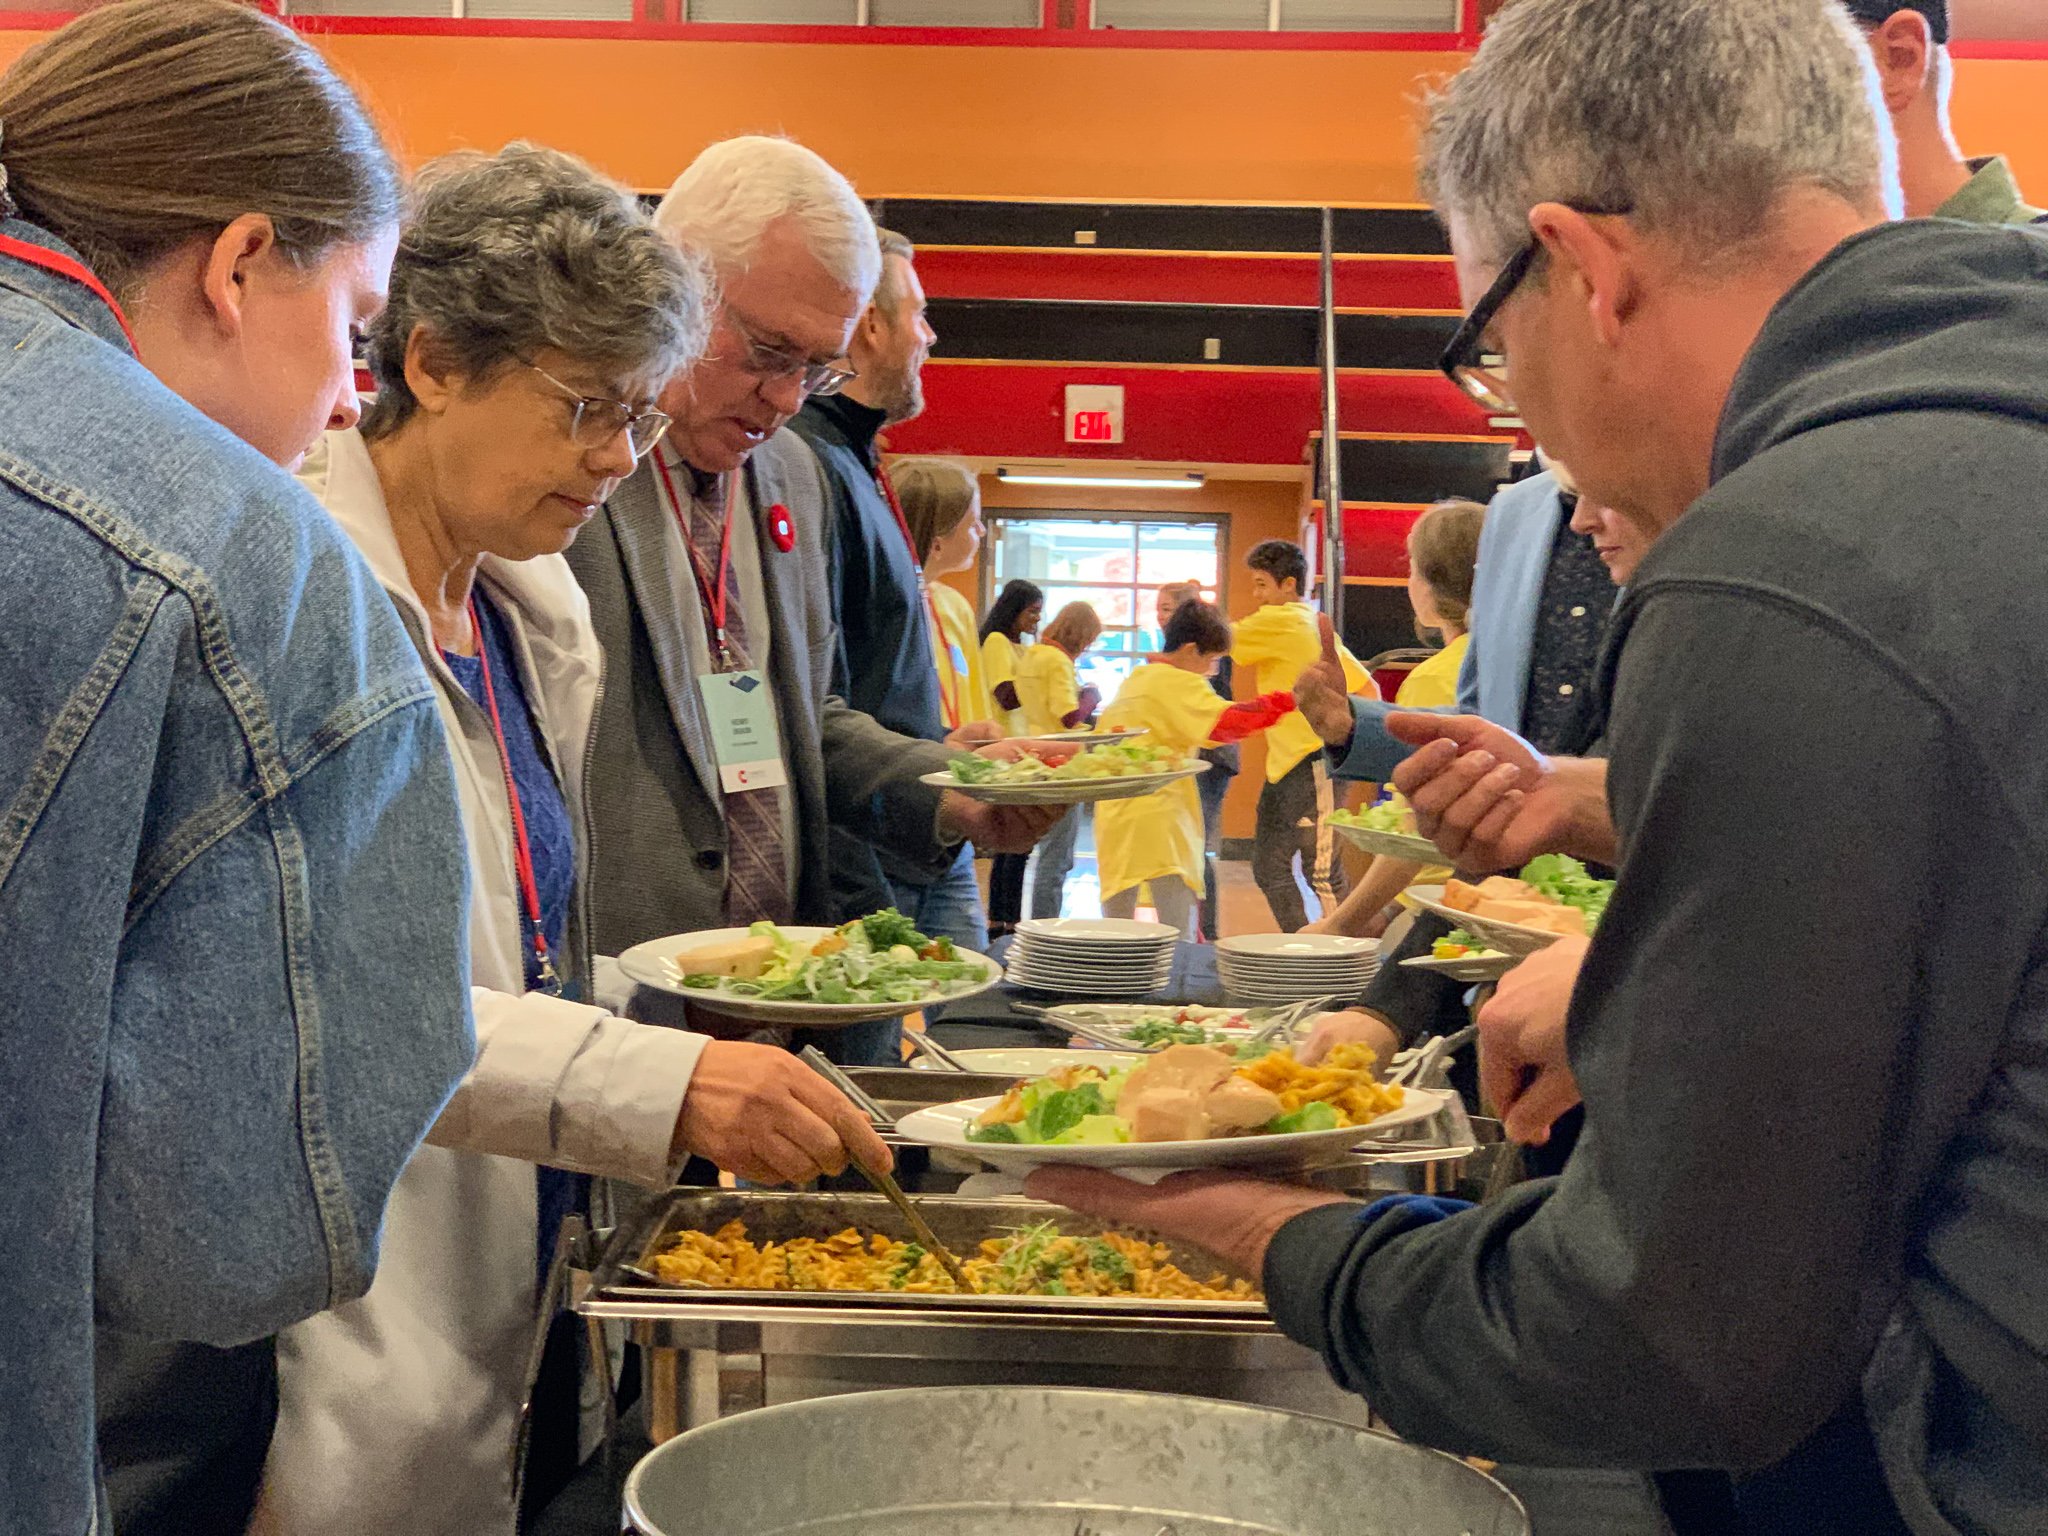 Lunch Break at Conference 2019